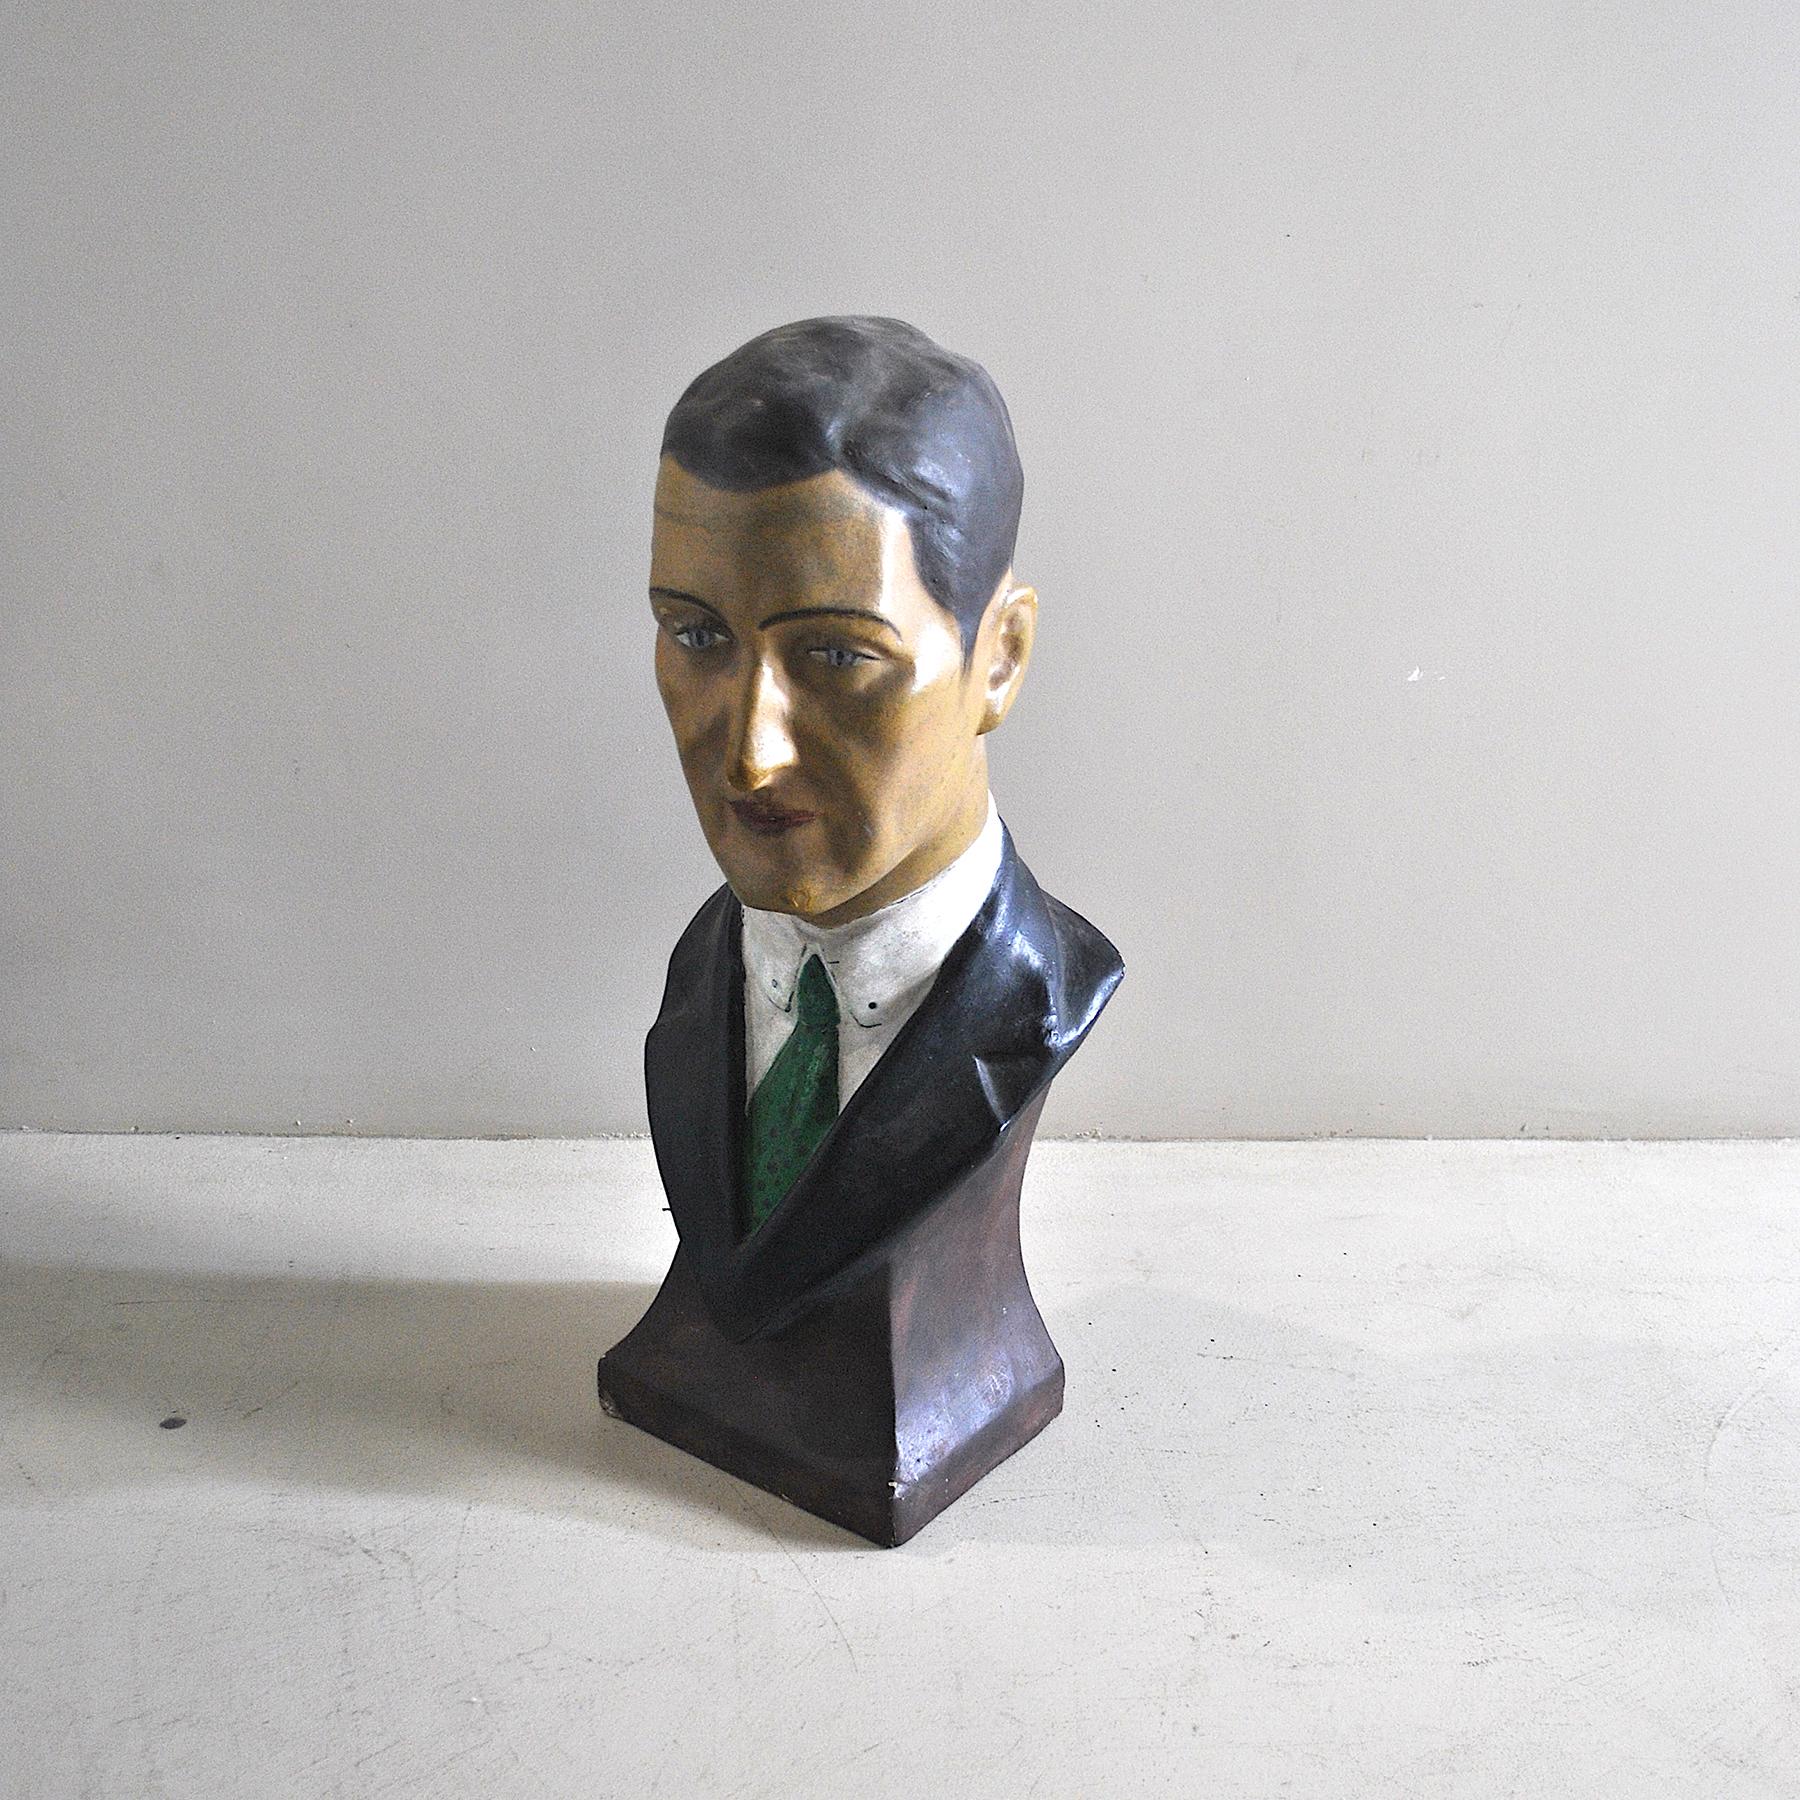 Papier maché sculpture of a bust depicting a man in a suit and tie, 1960s manufacture, Viareggio, Tuscany, signed Lopez.